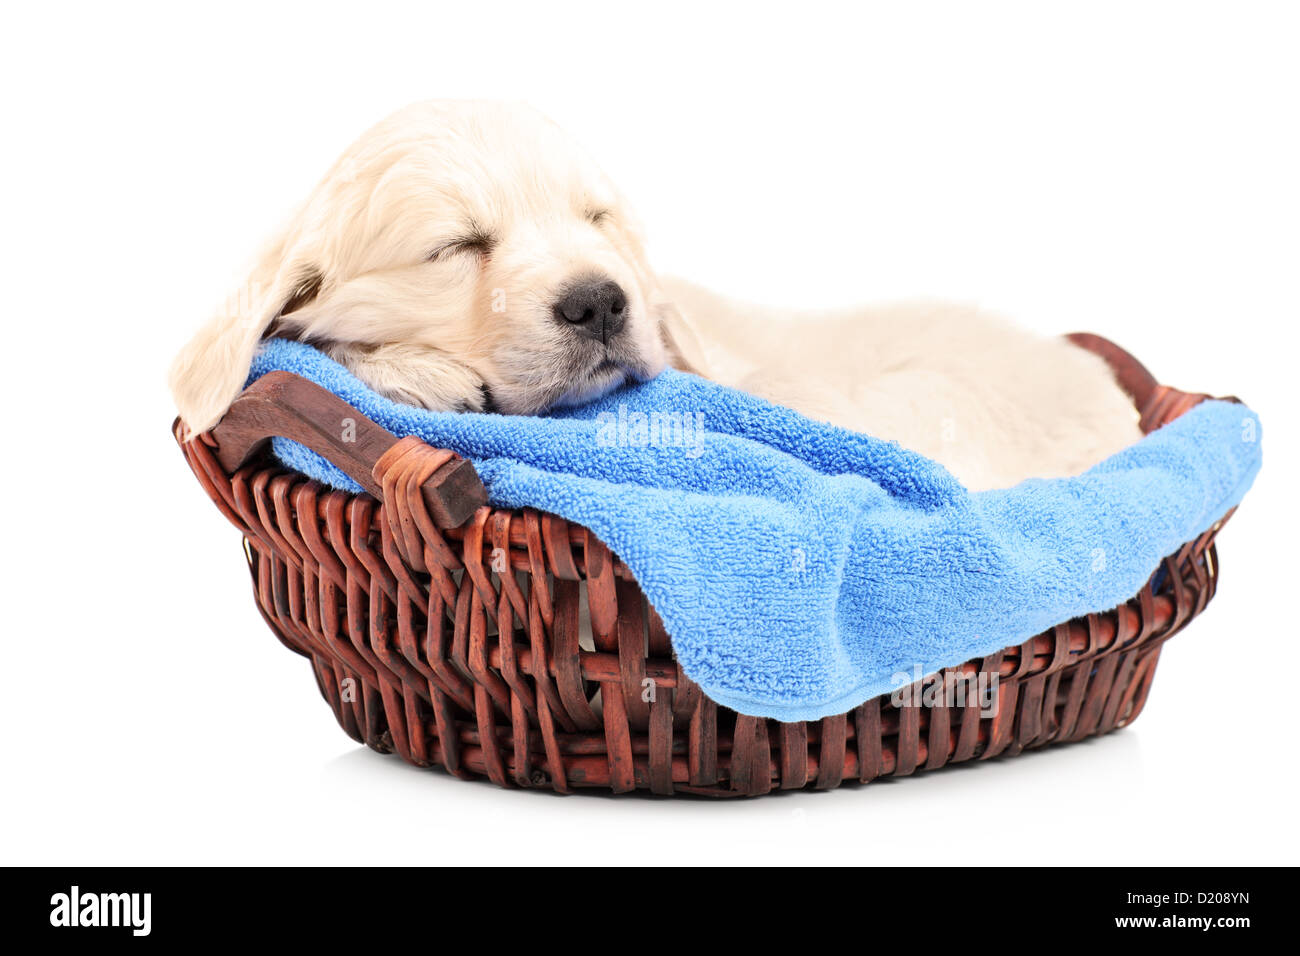 Retriever puppy dog sleeping in a basket isolated on white background Stock Photo